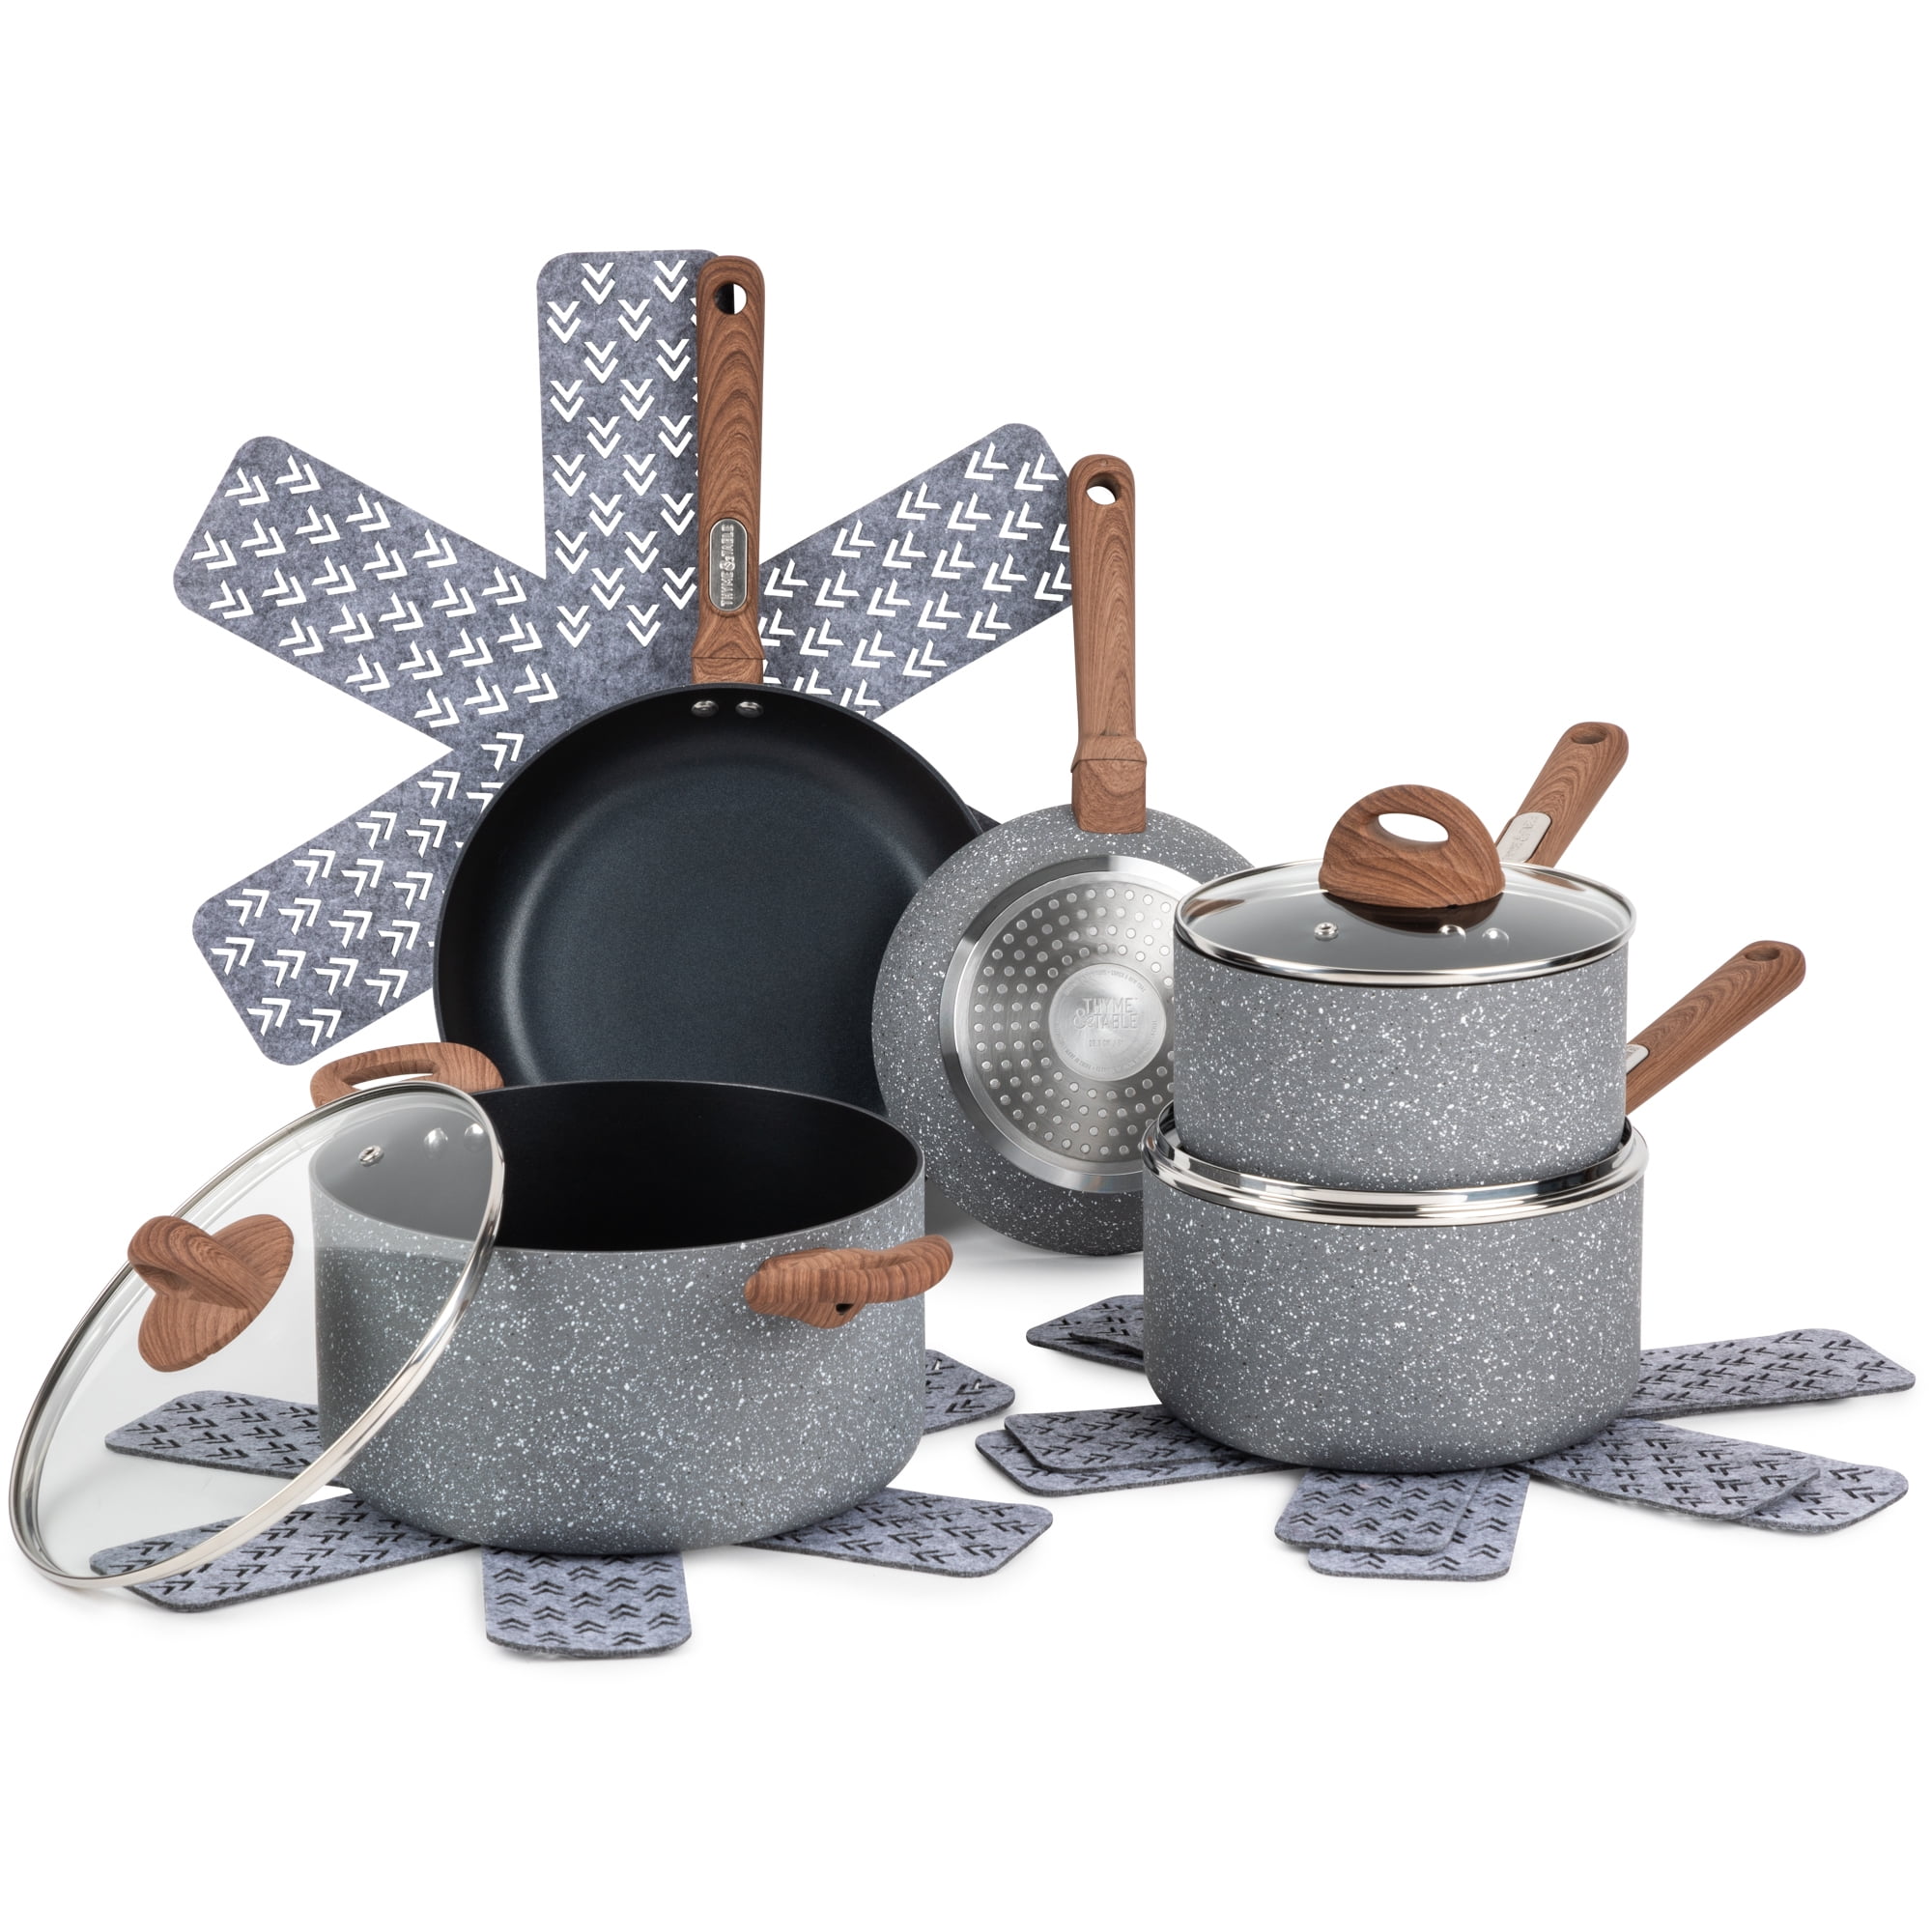 thyme and table cookware 2023｜TikTok Search